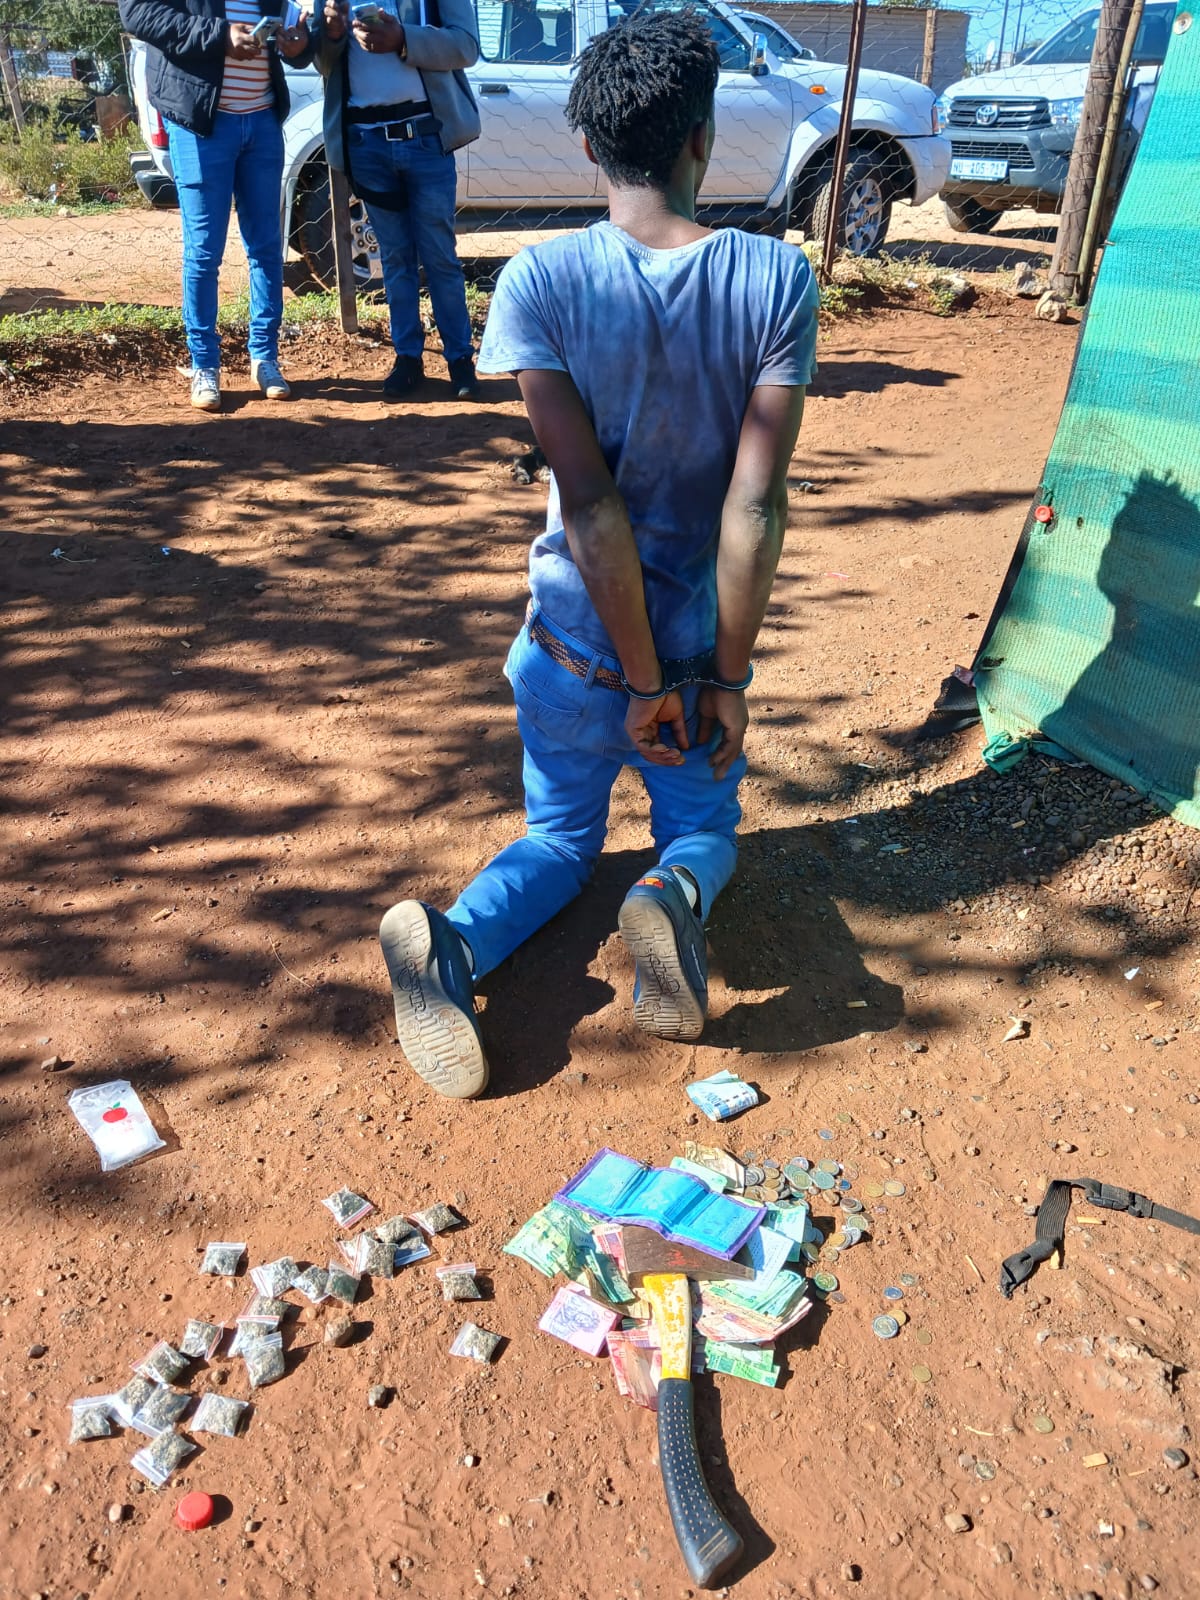 Police remove drugs from the streets in Postmasburg